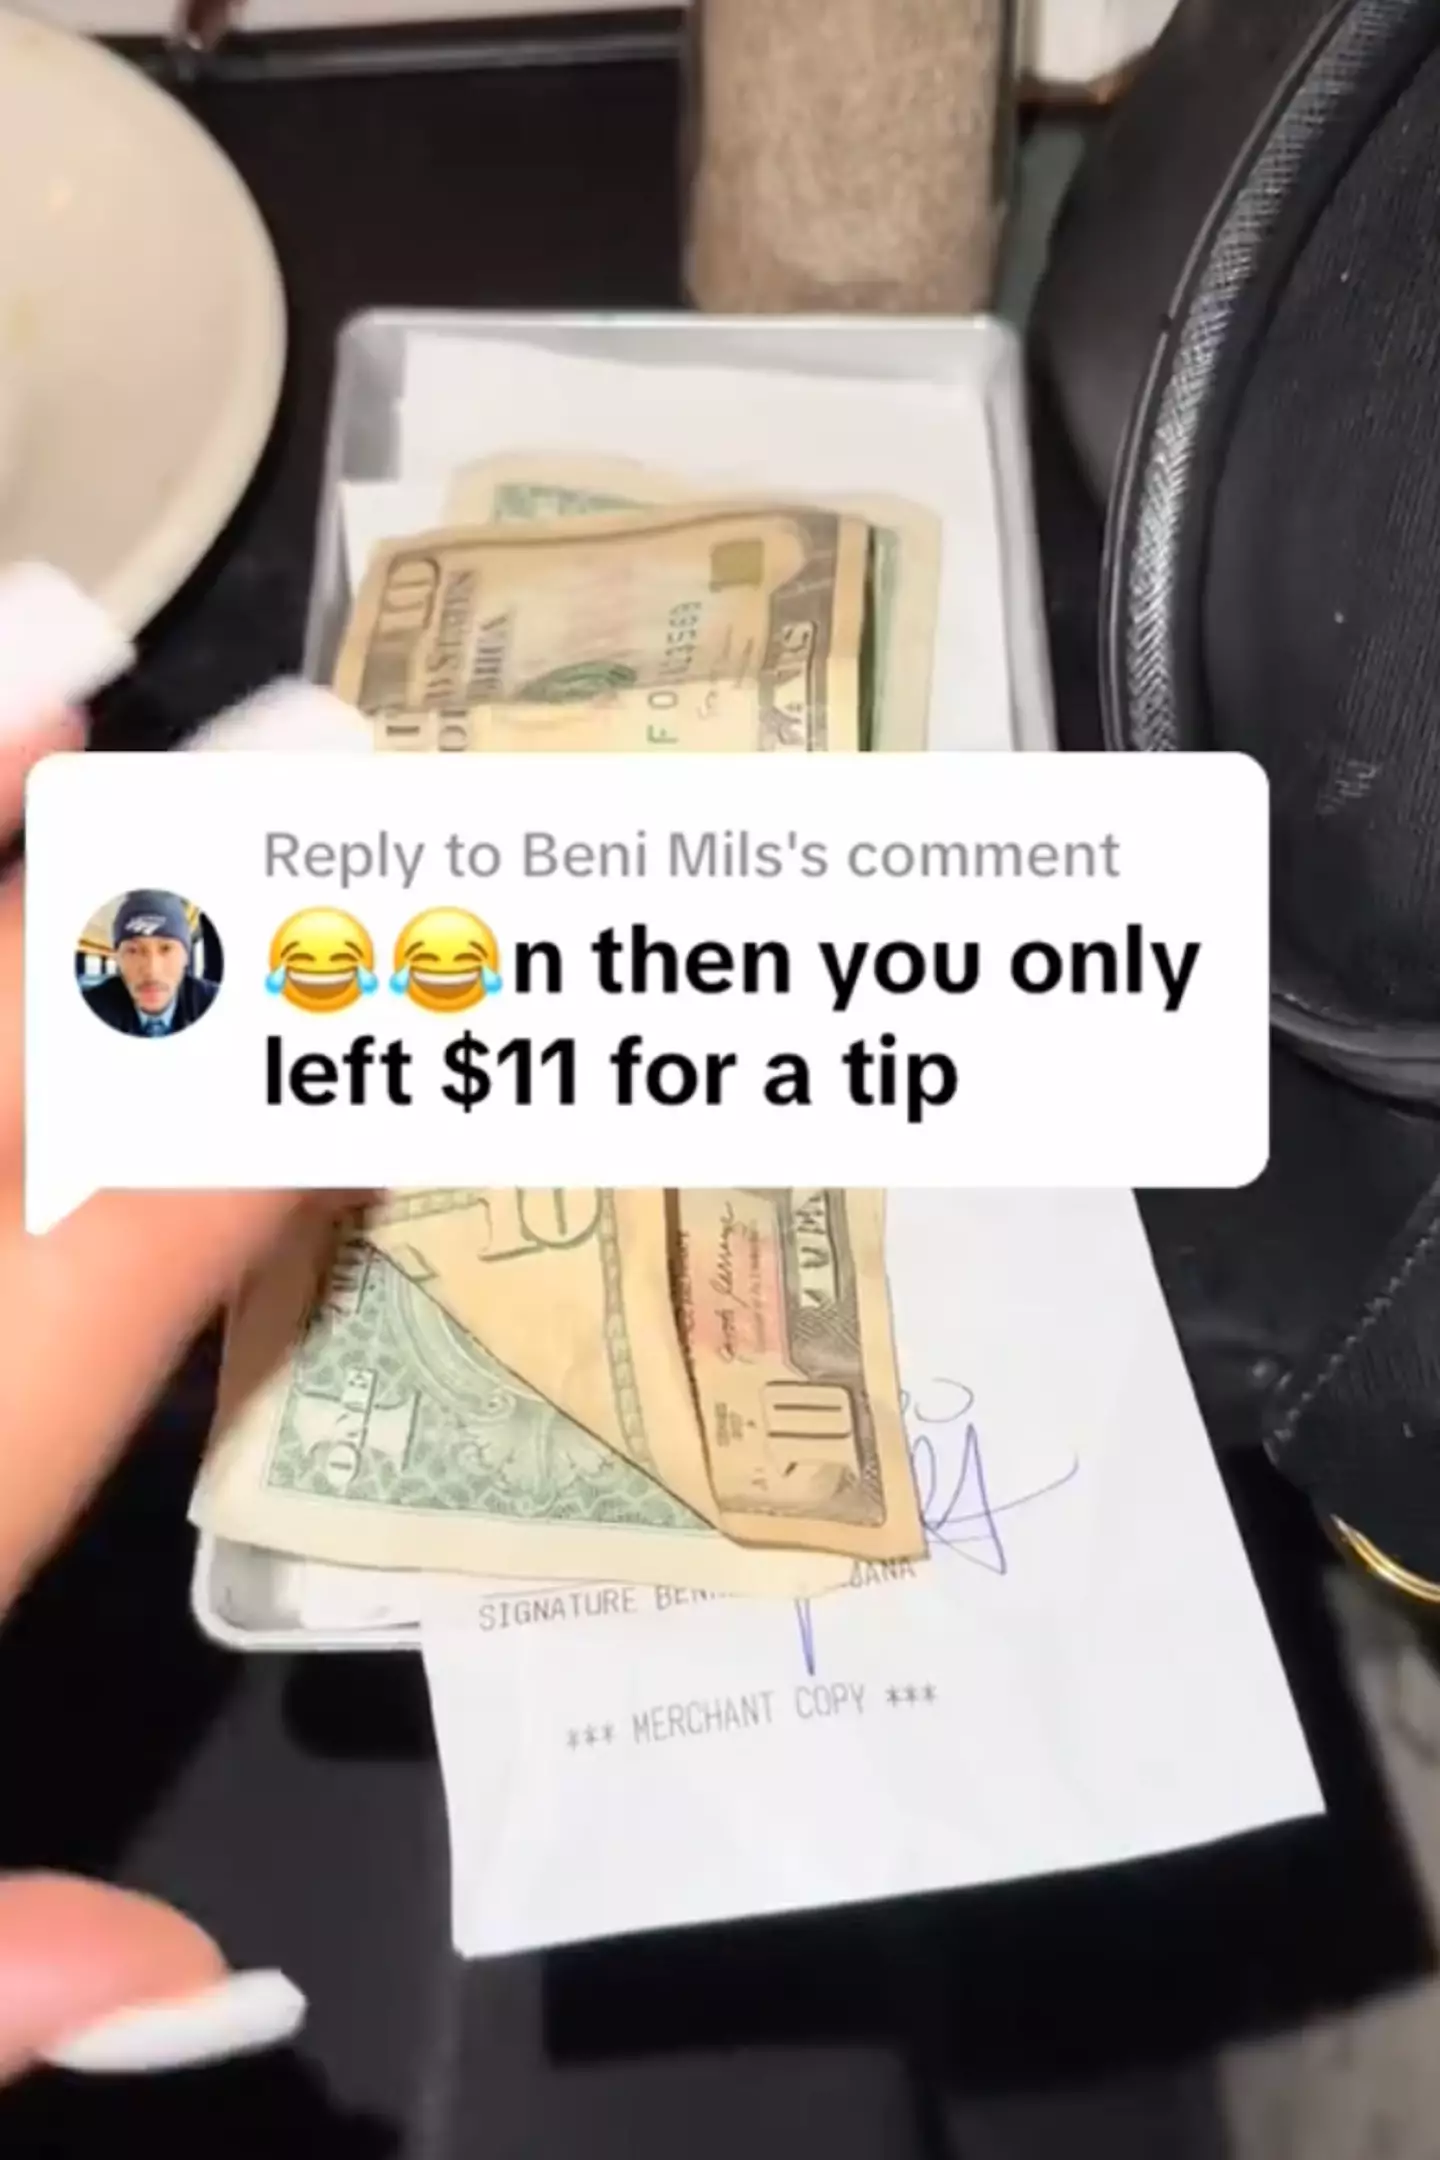 People noticed that she'd left an $11 tip and had some things to say about it.